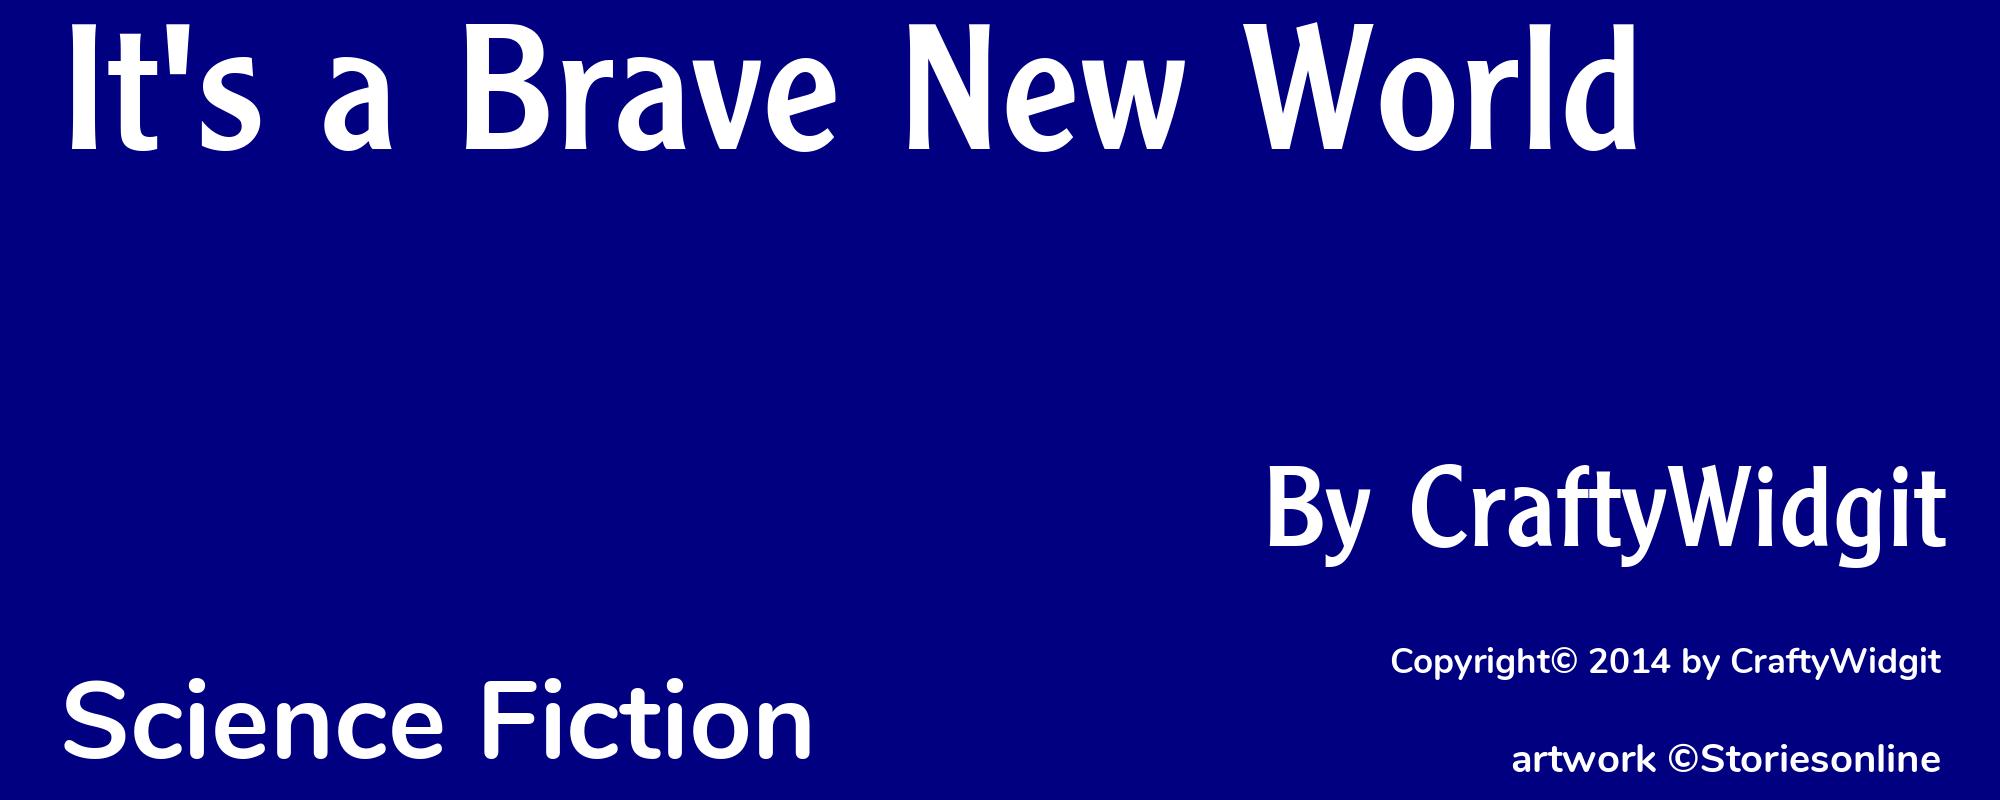 It's a Brave New World - Cover